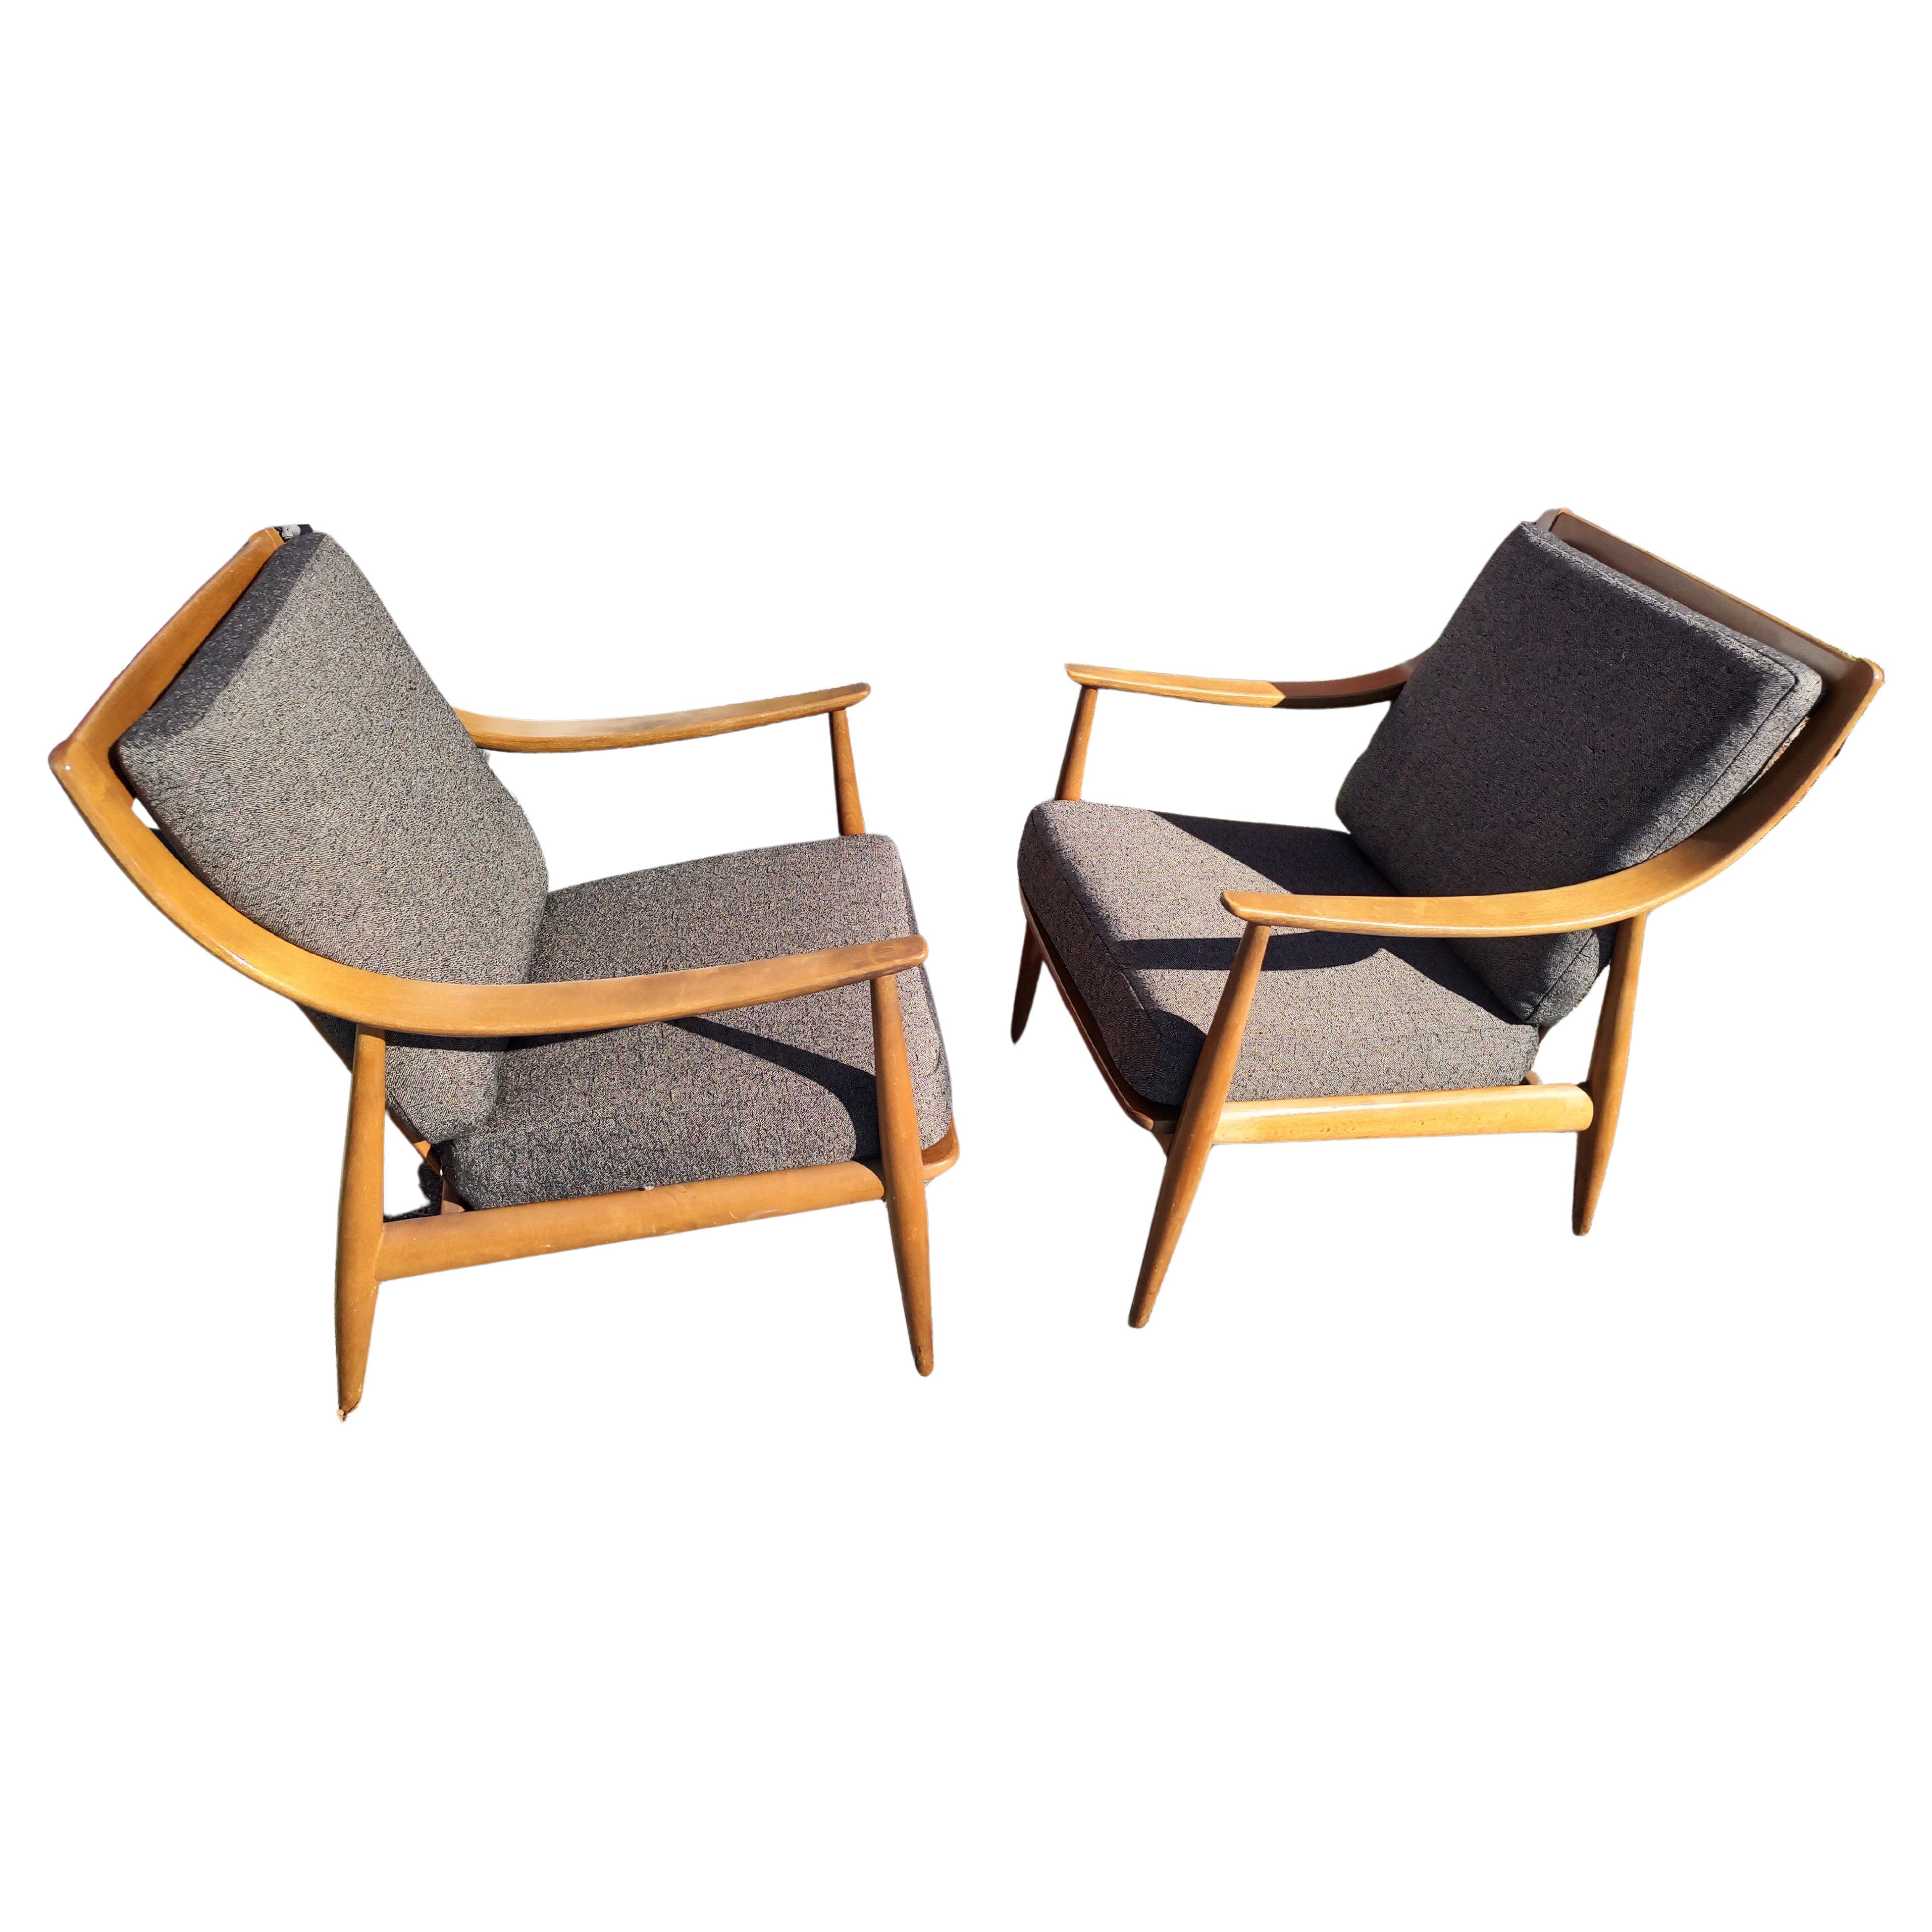 Pair of Mid-Century Modern Lounge Chairs by Peter Hvidt & Olga Molgaard Neilson  In Good Condition For Sale In Port Jervis, NY